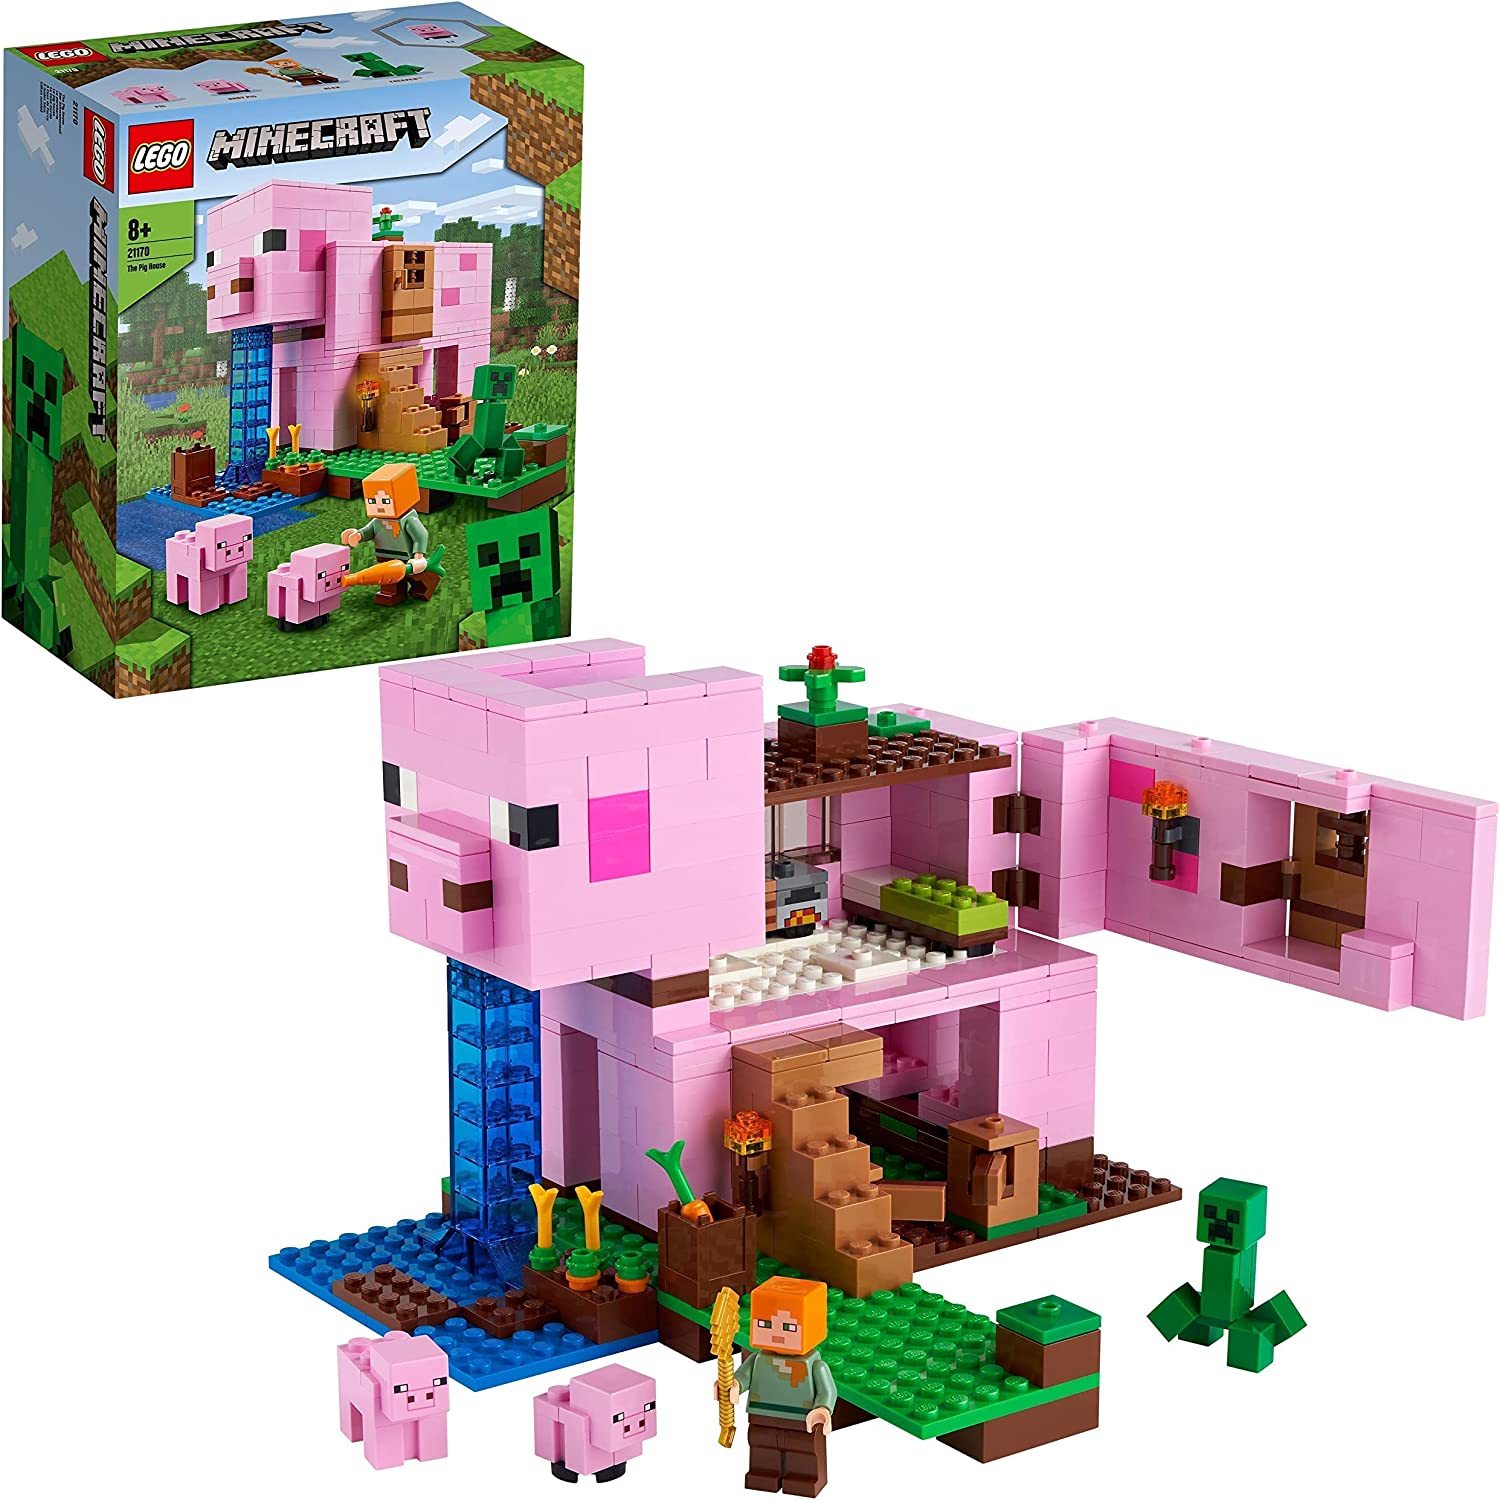 Lego 21170 Minecraft The Pig House Construction Kit with Alex and the Creeper Figures